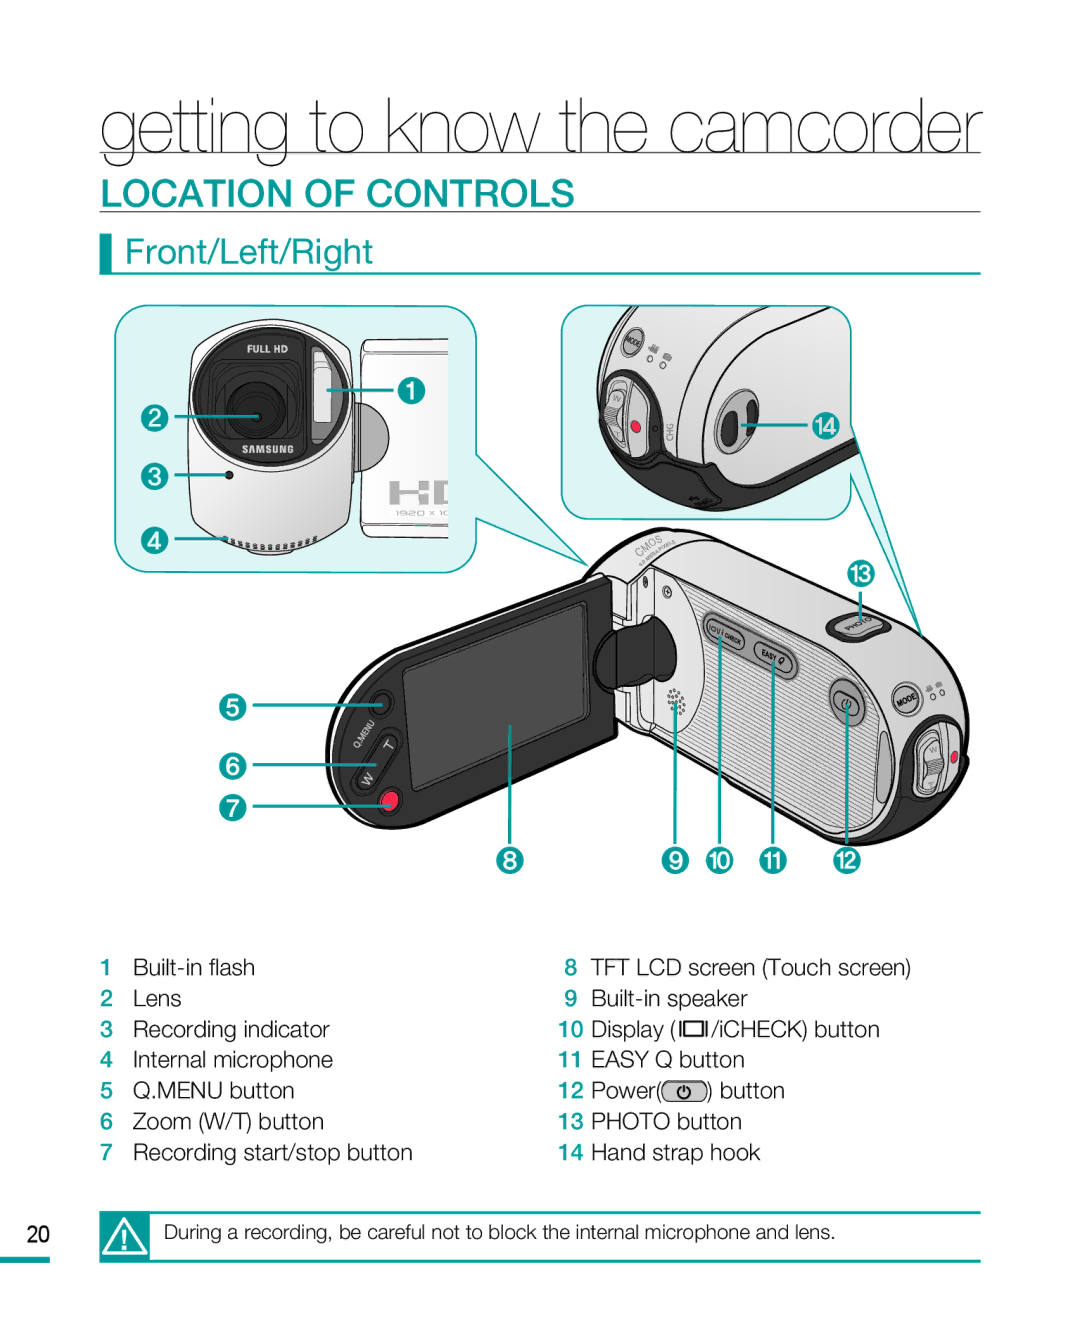 Samsung HMX-R10SP/XEB, HMX-R10BP/EDC, HMX-R10SP/EDC, HMX-R10BP/MEA Location of Controls, Front/Left/Right, Built-in flash 